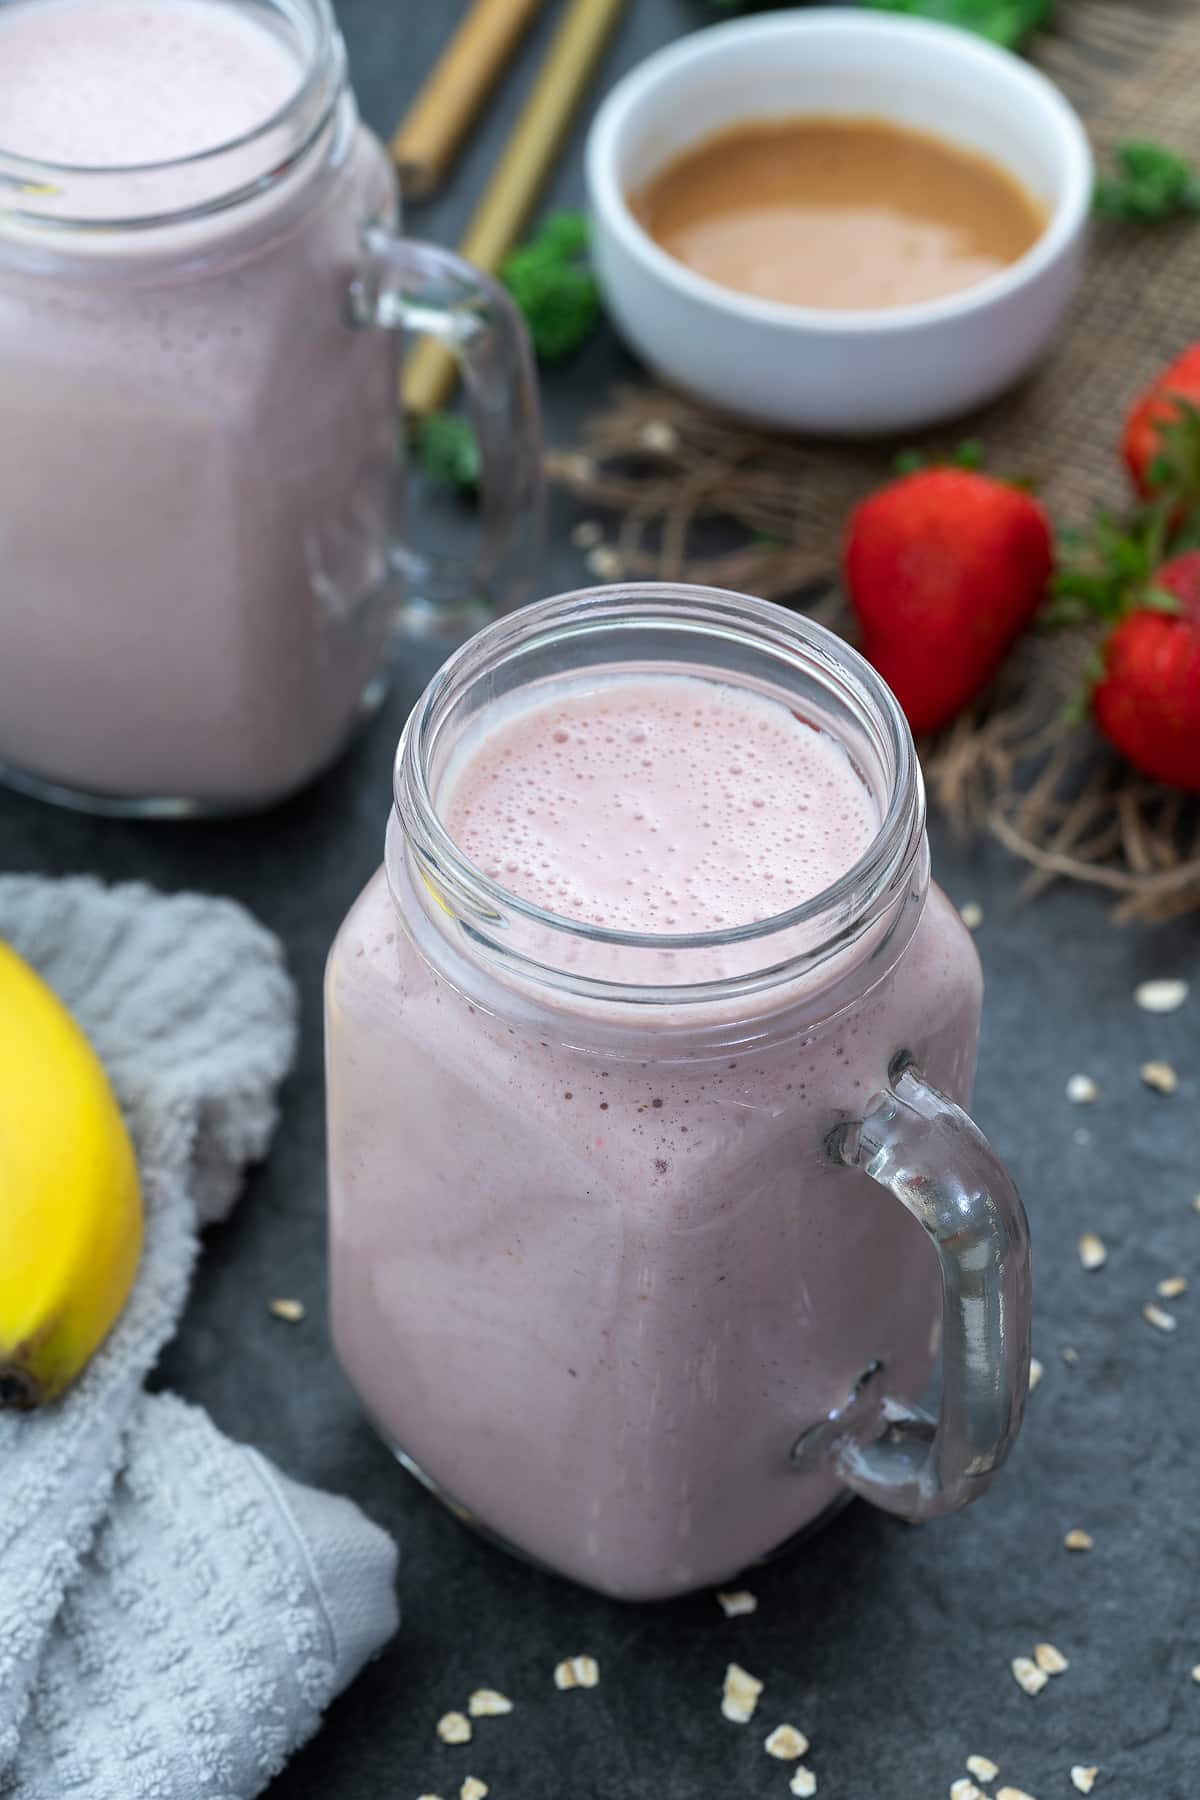 Greek yogurt smoothie served in a glass mug with strawberries and banana placed nearby.